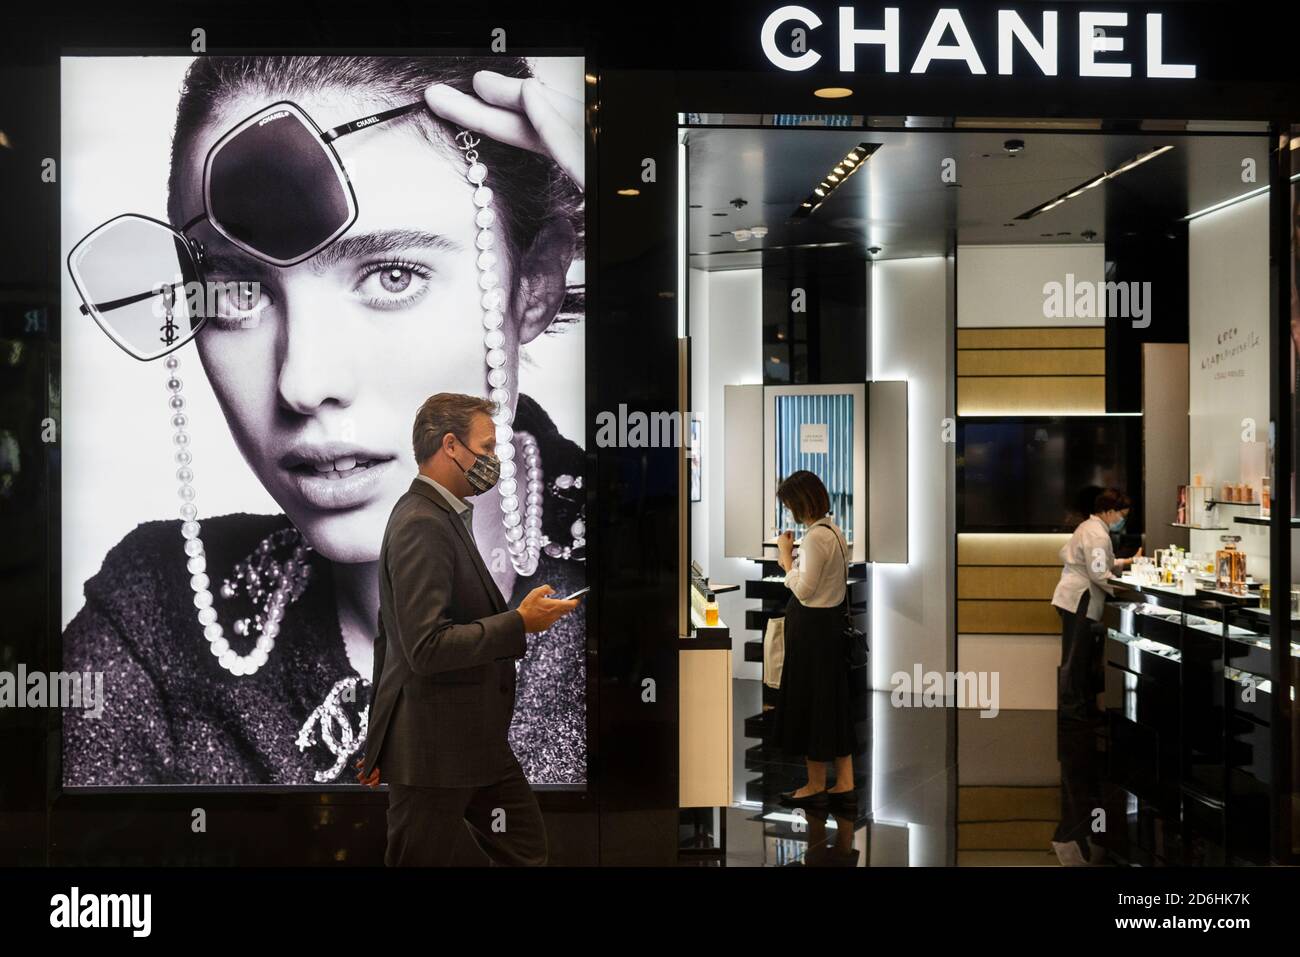 French multinational Chanel clothing and beauty products brand store seen  in Hong Kong Stock Photo - Alamy